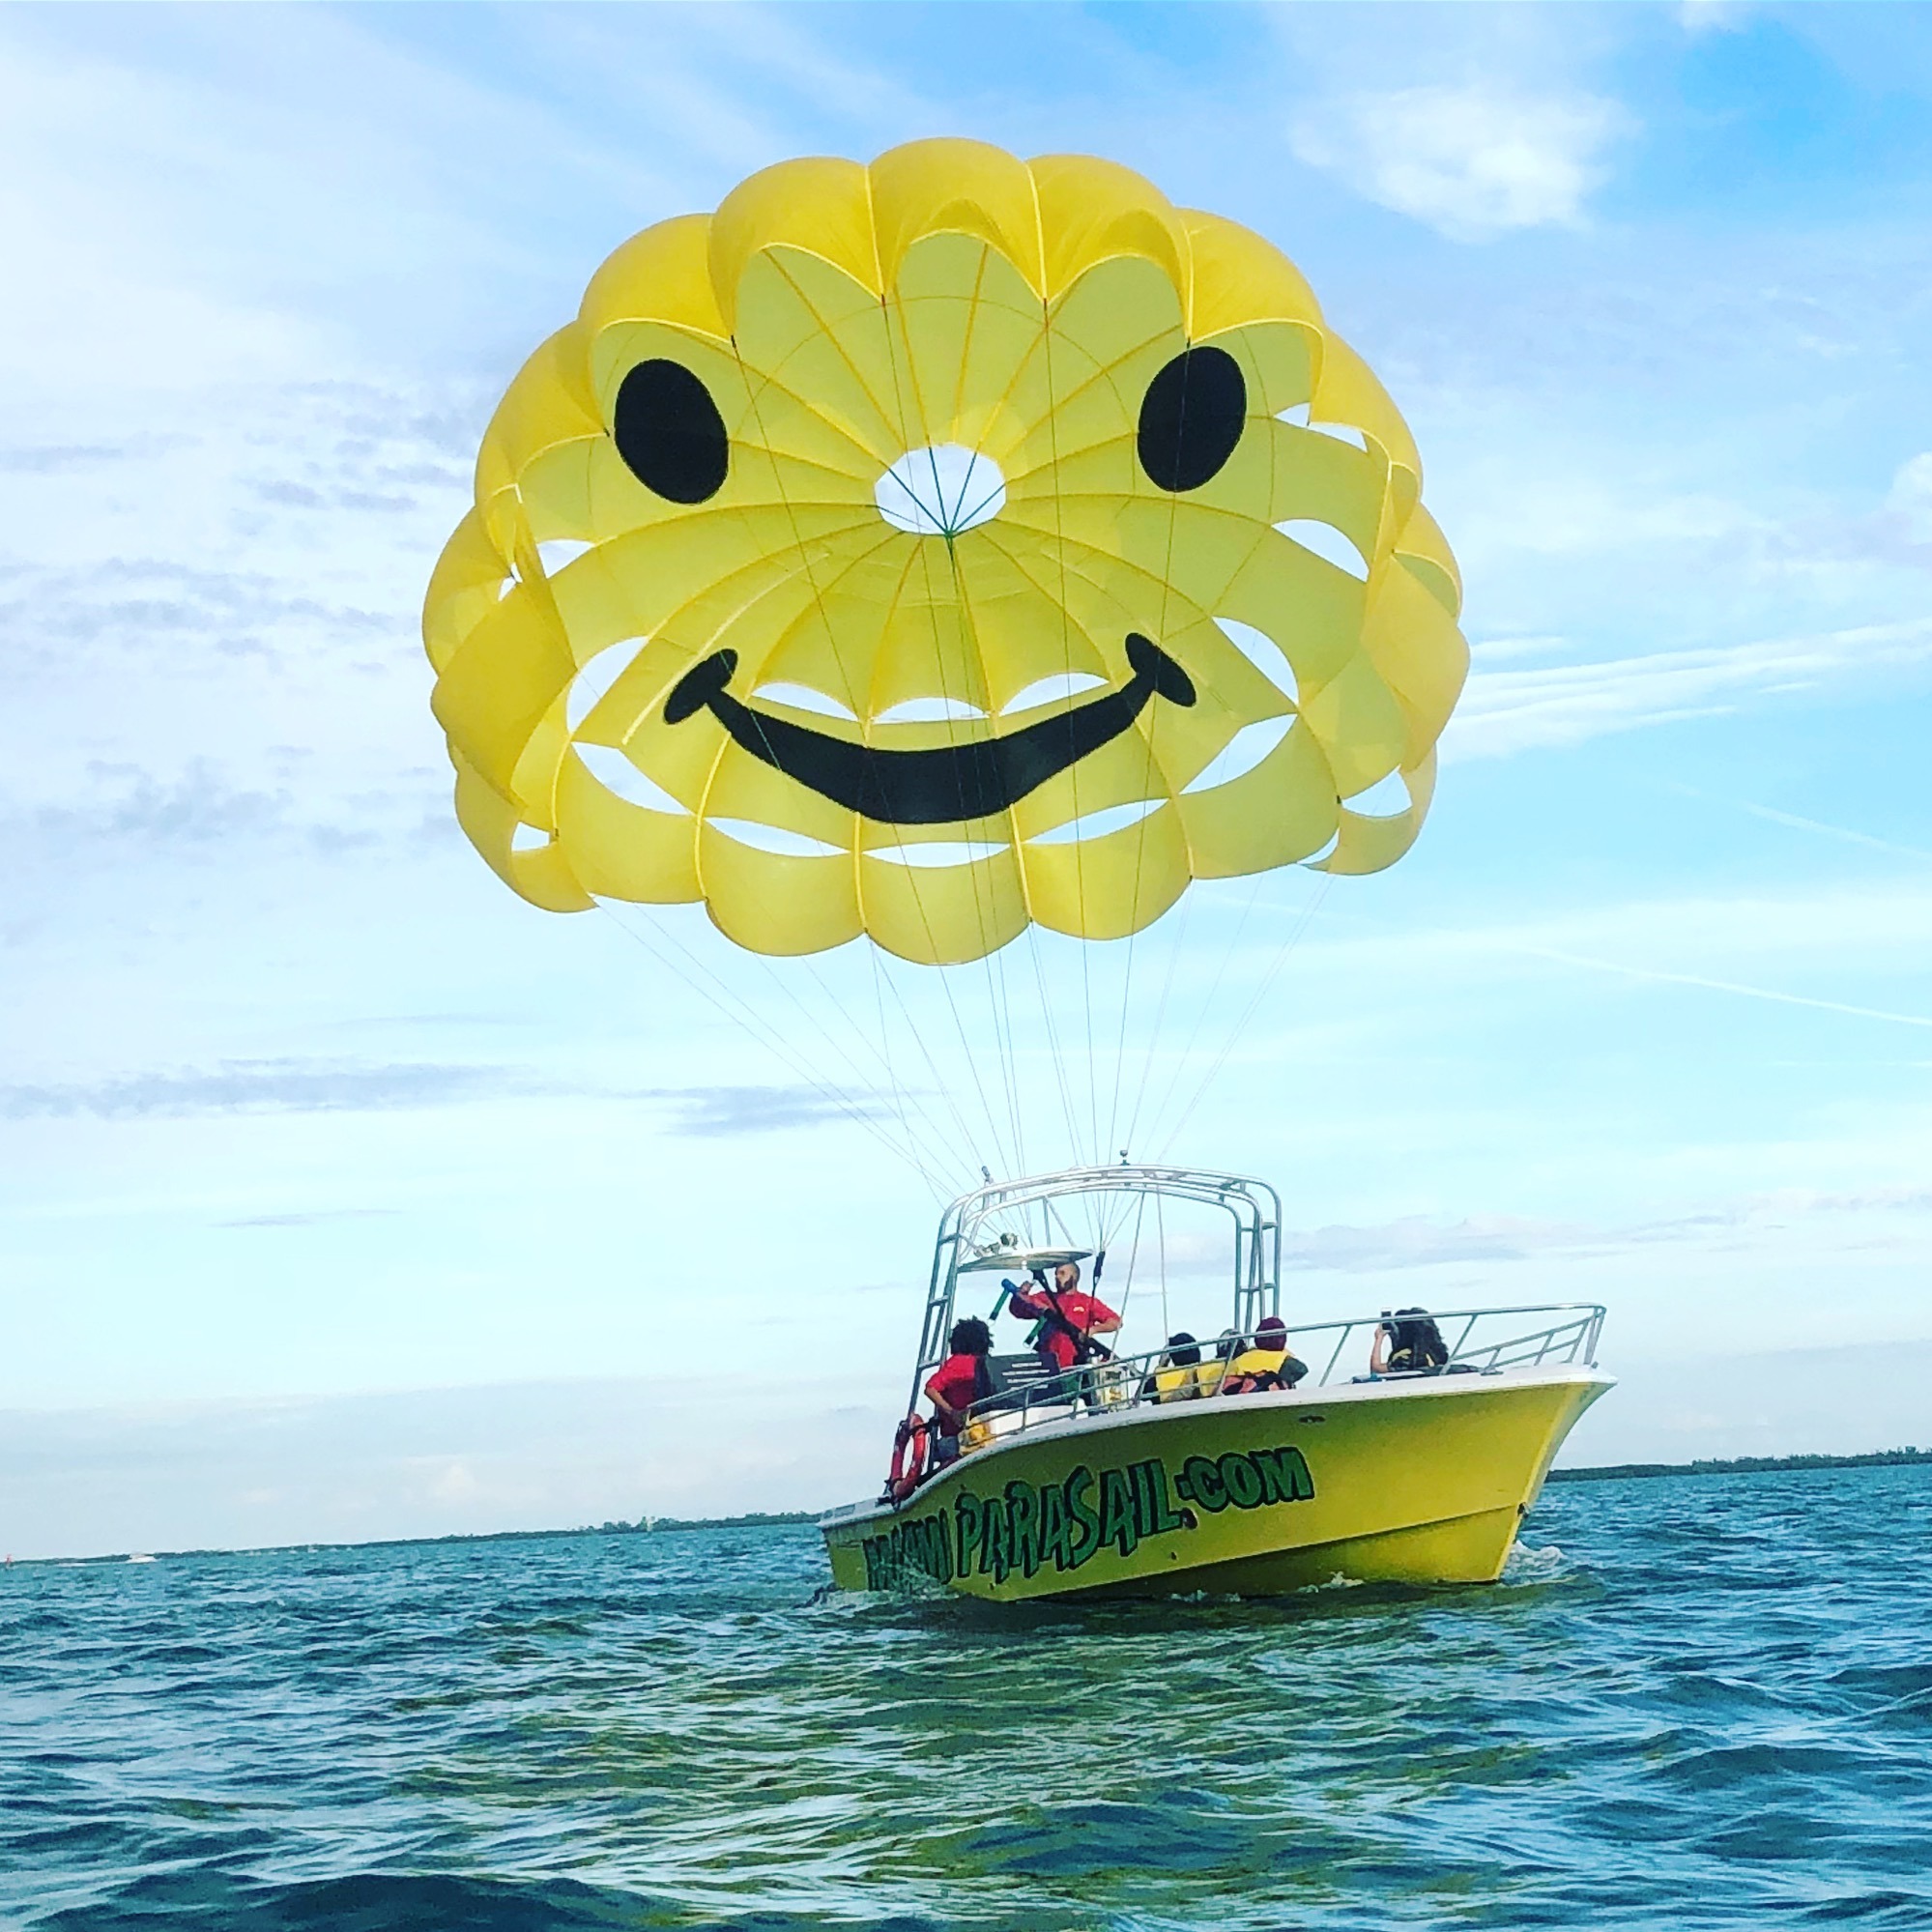 Miami’s Hidden Gems for Parasailing Enthusiasts